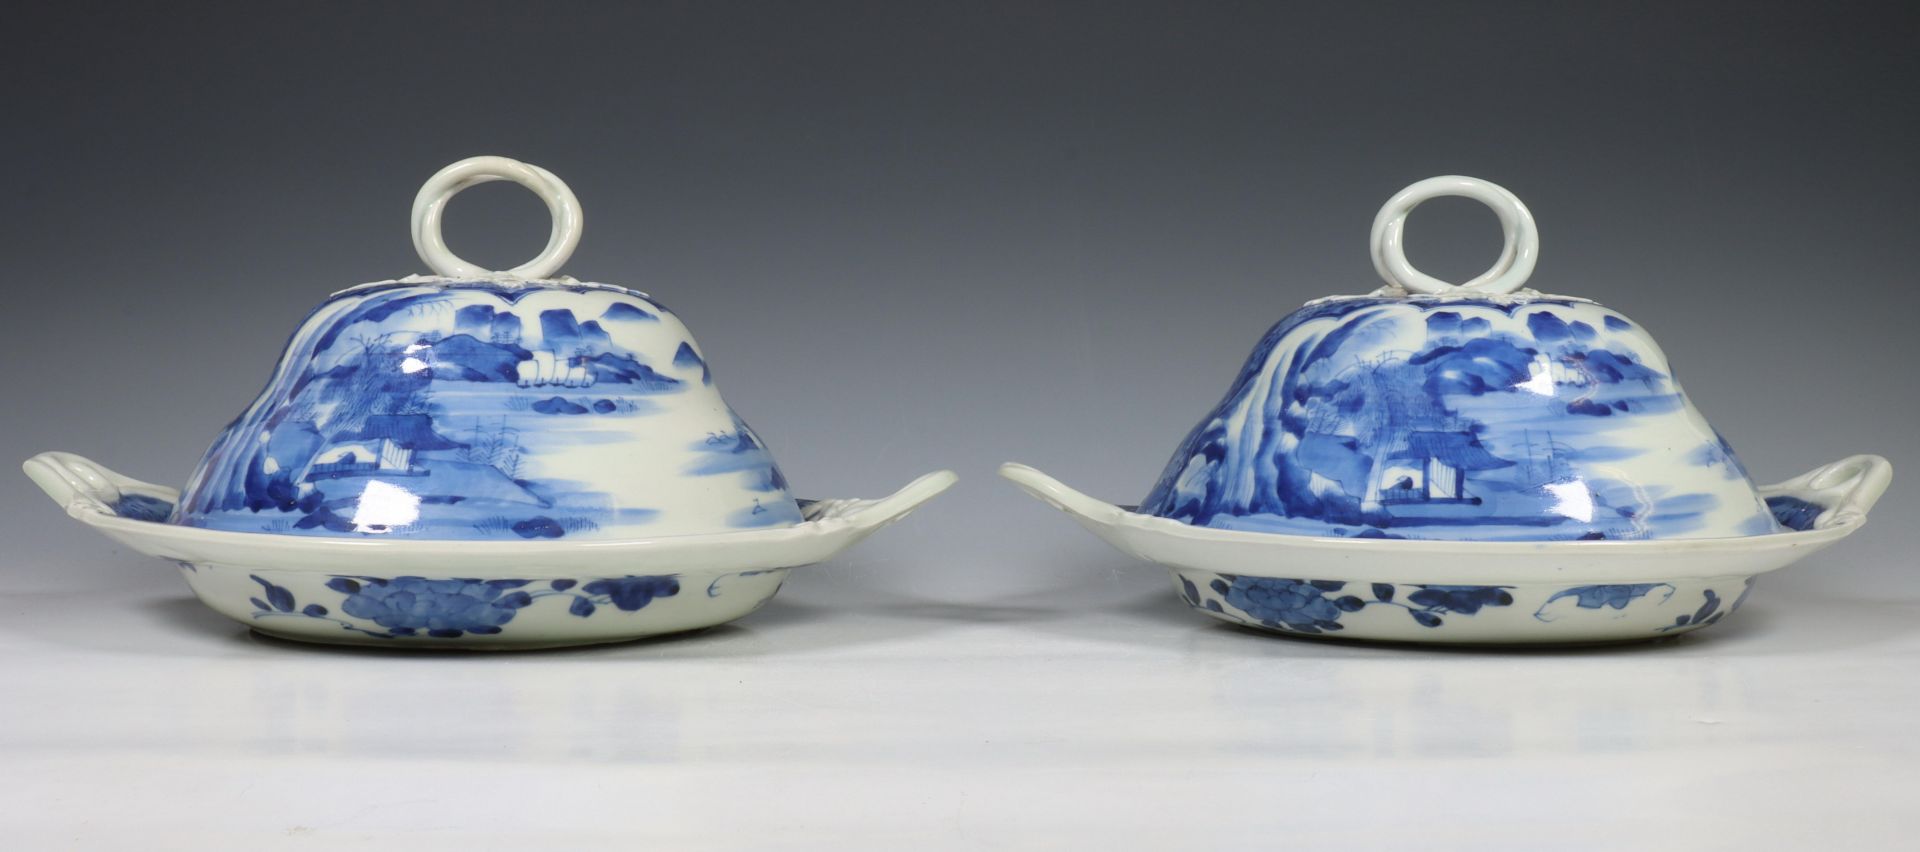 Japan, pair of Arita blue and white porcelain serving dishes and covers, 19th century, decorated